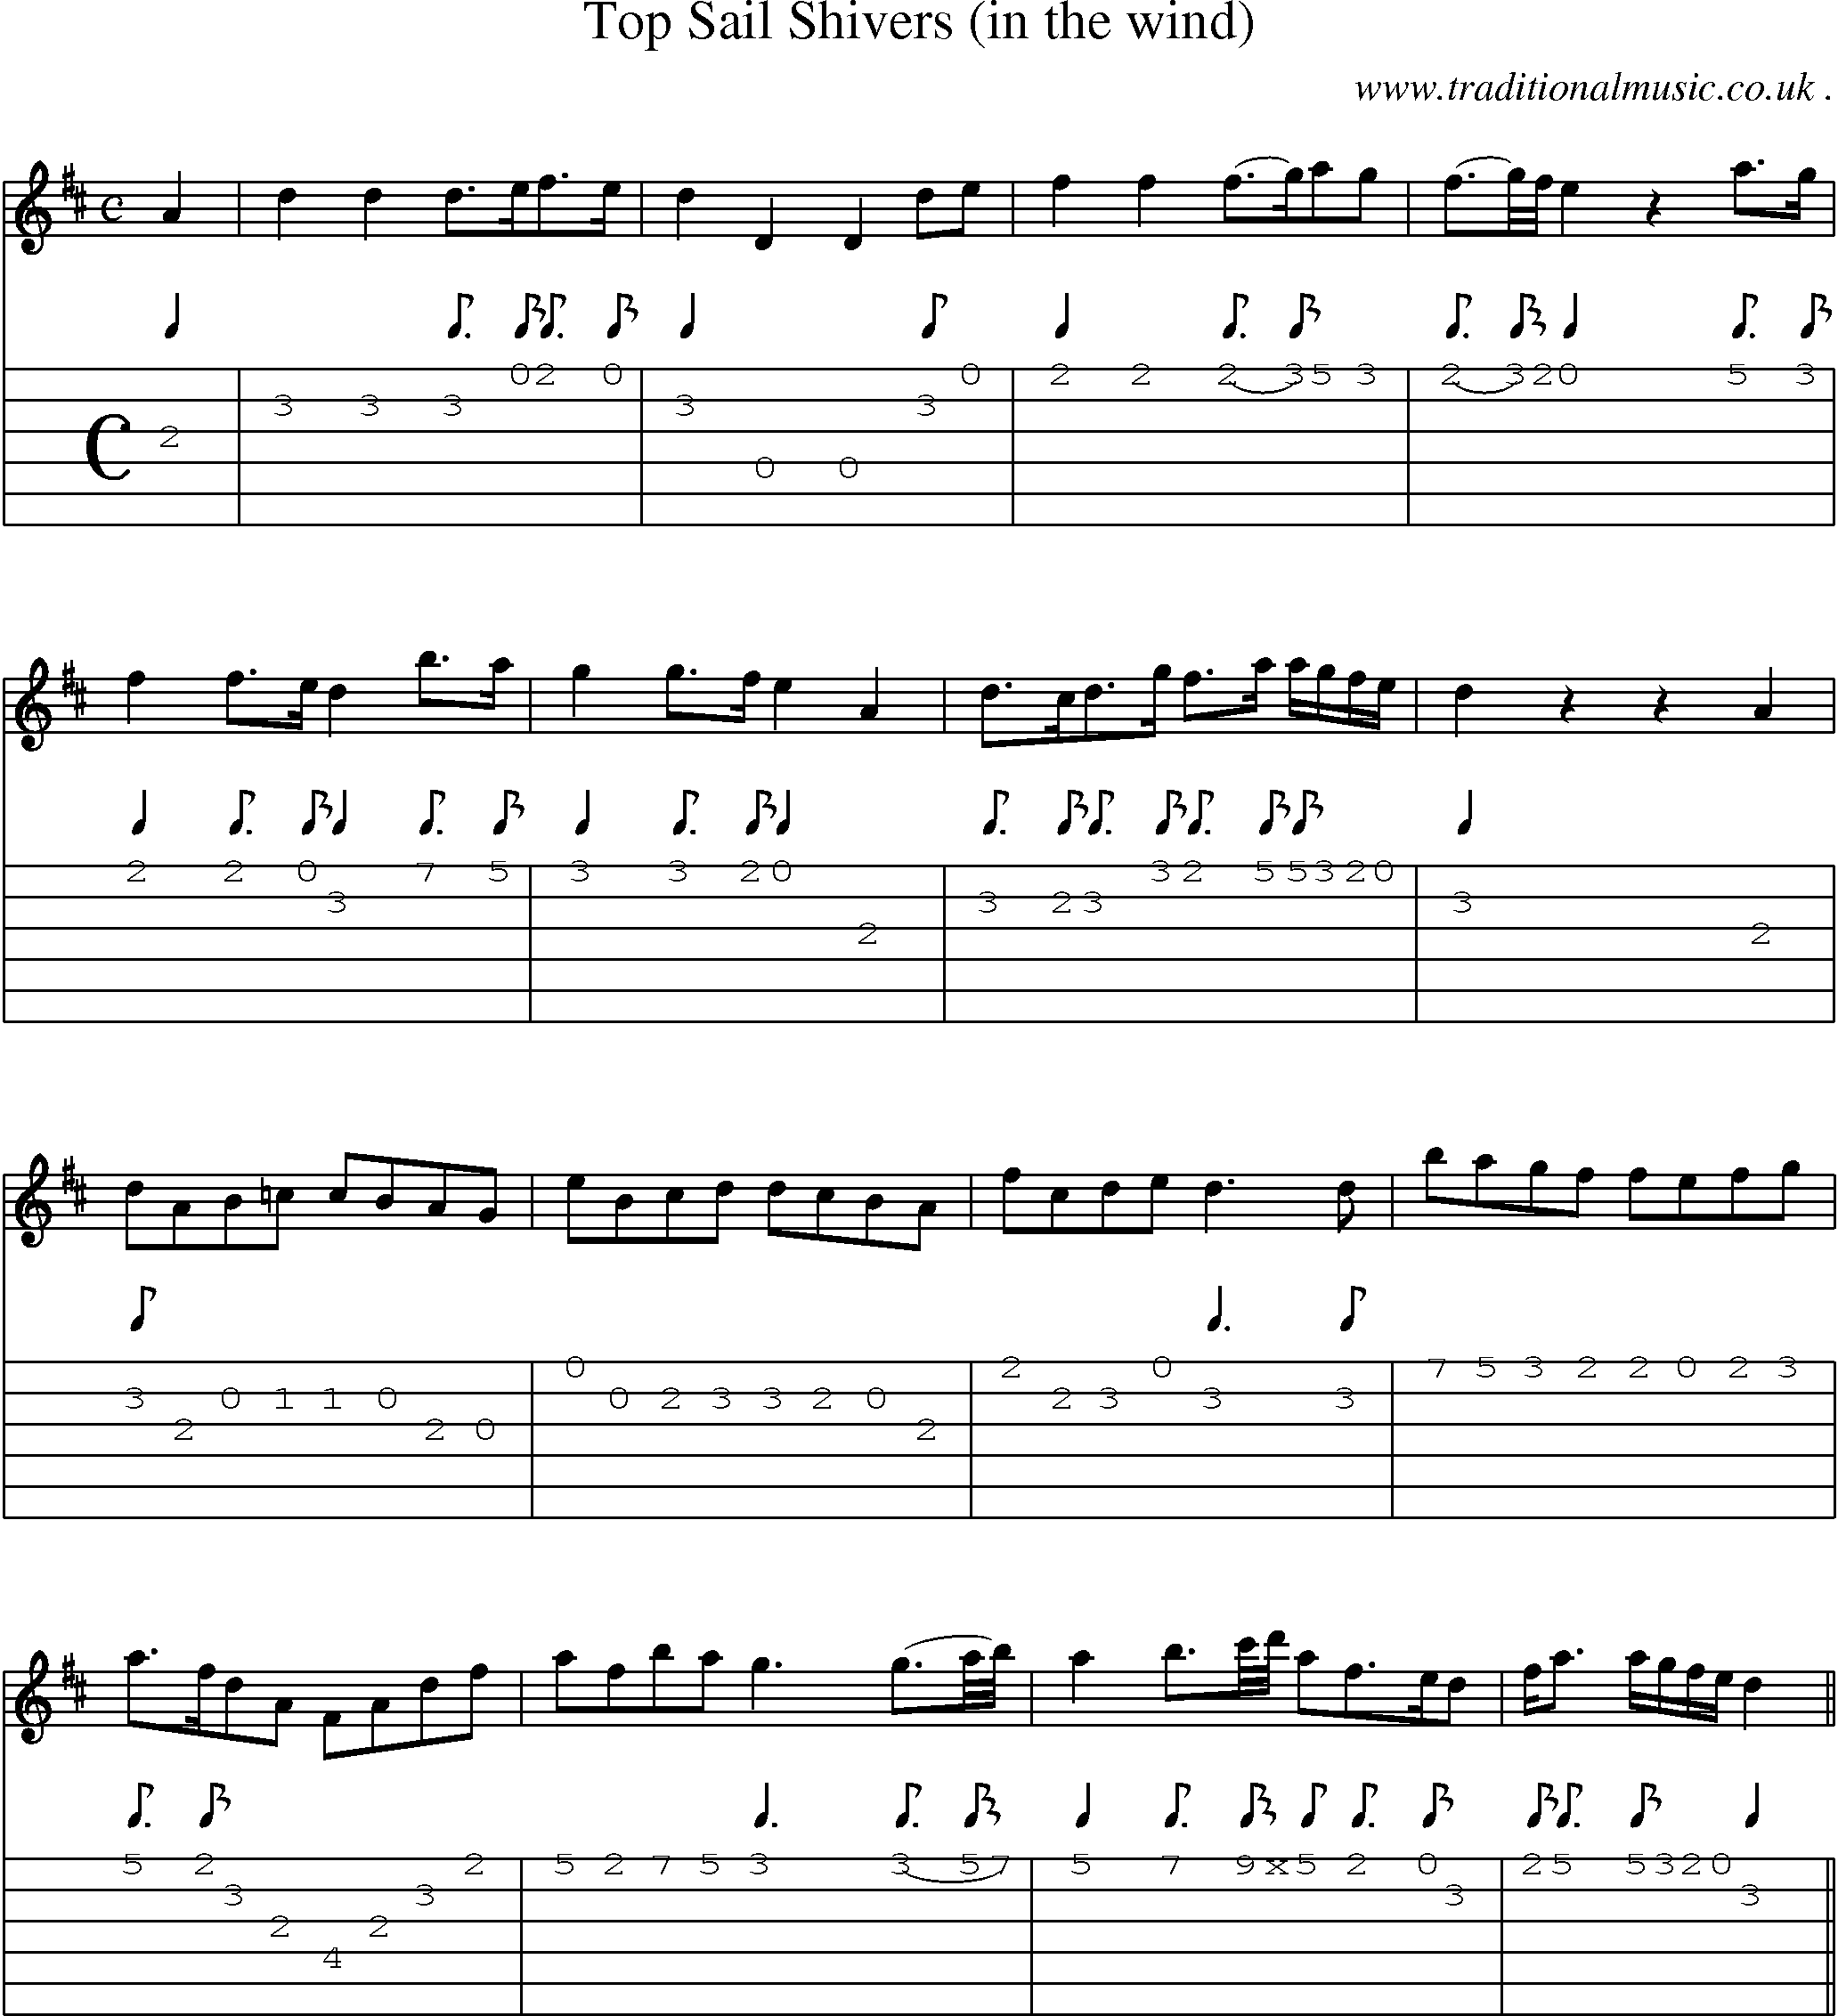 Sheet-Music and Guitar Tabs for Top Sail Shivers (in The Wind)